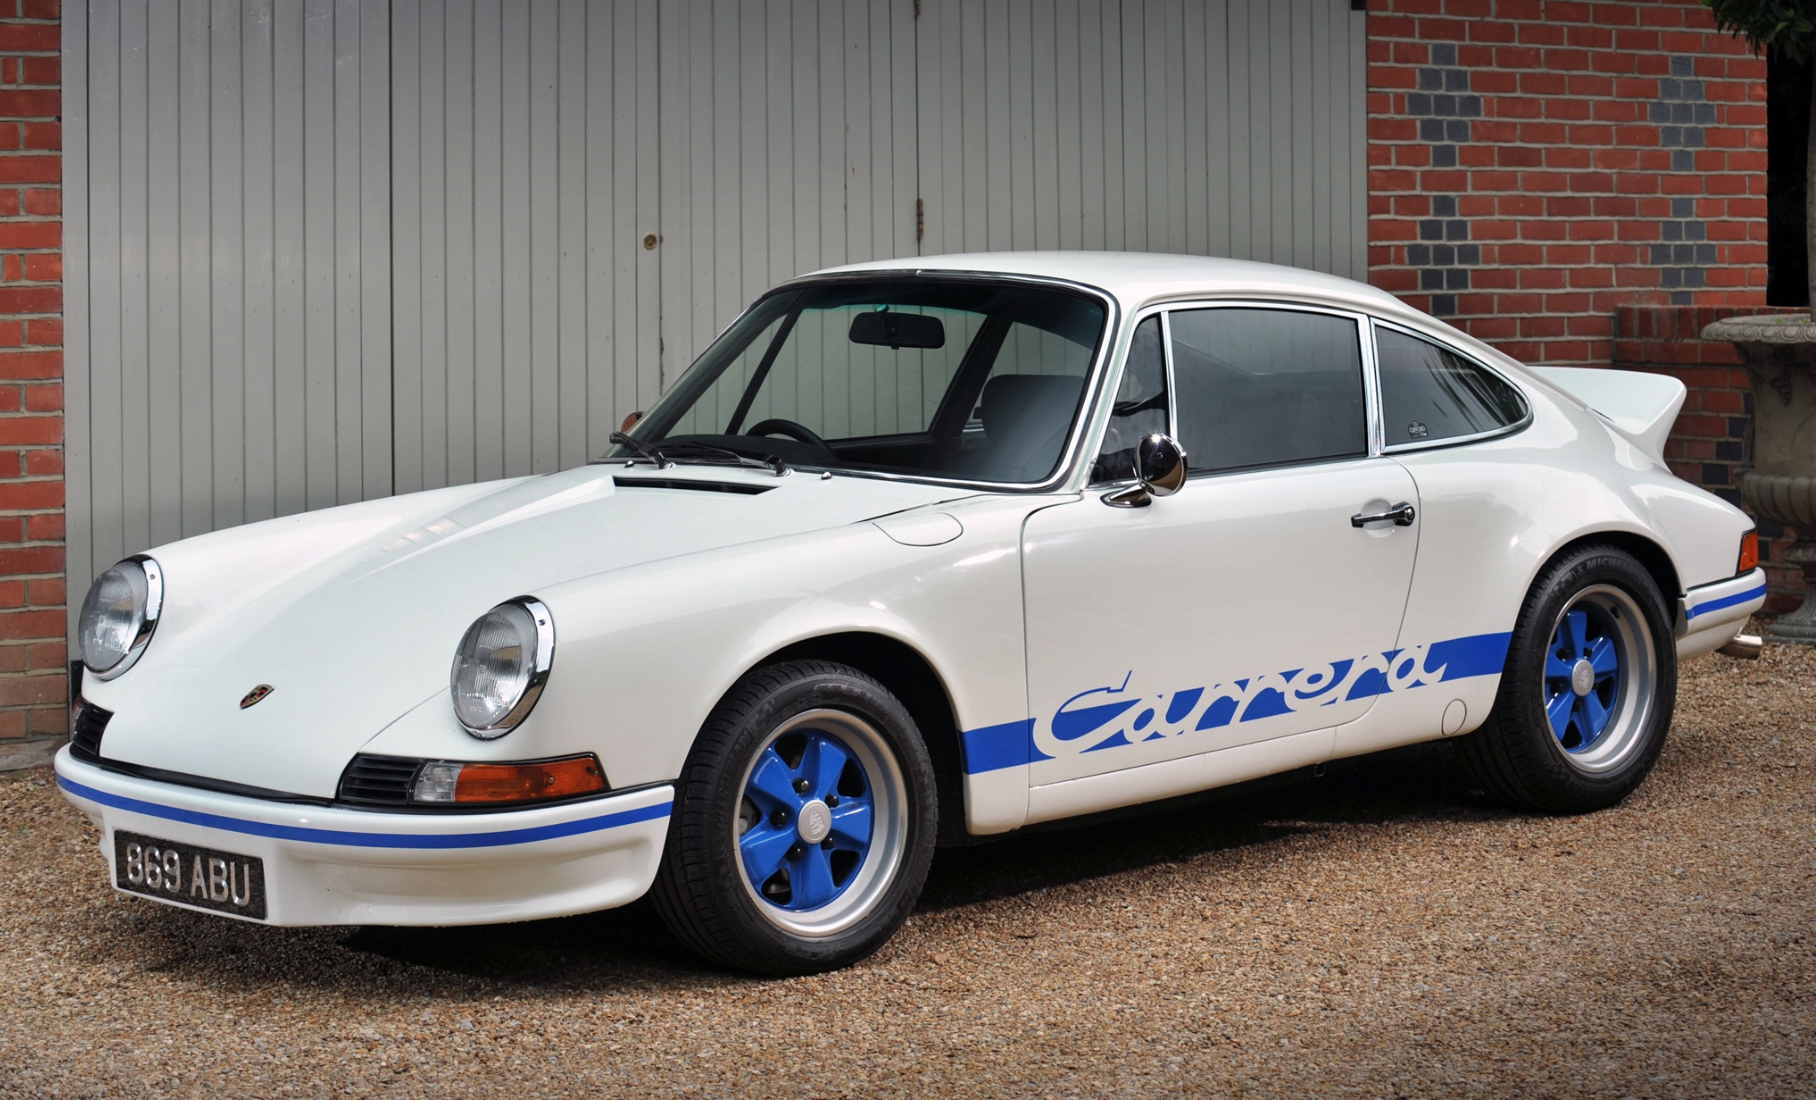 911 Carrera 2.7 RS, a timeless classic